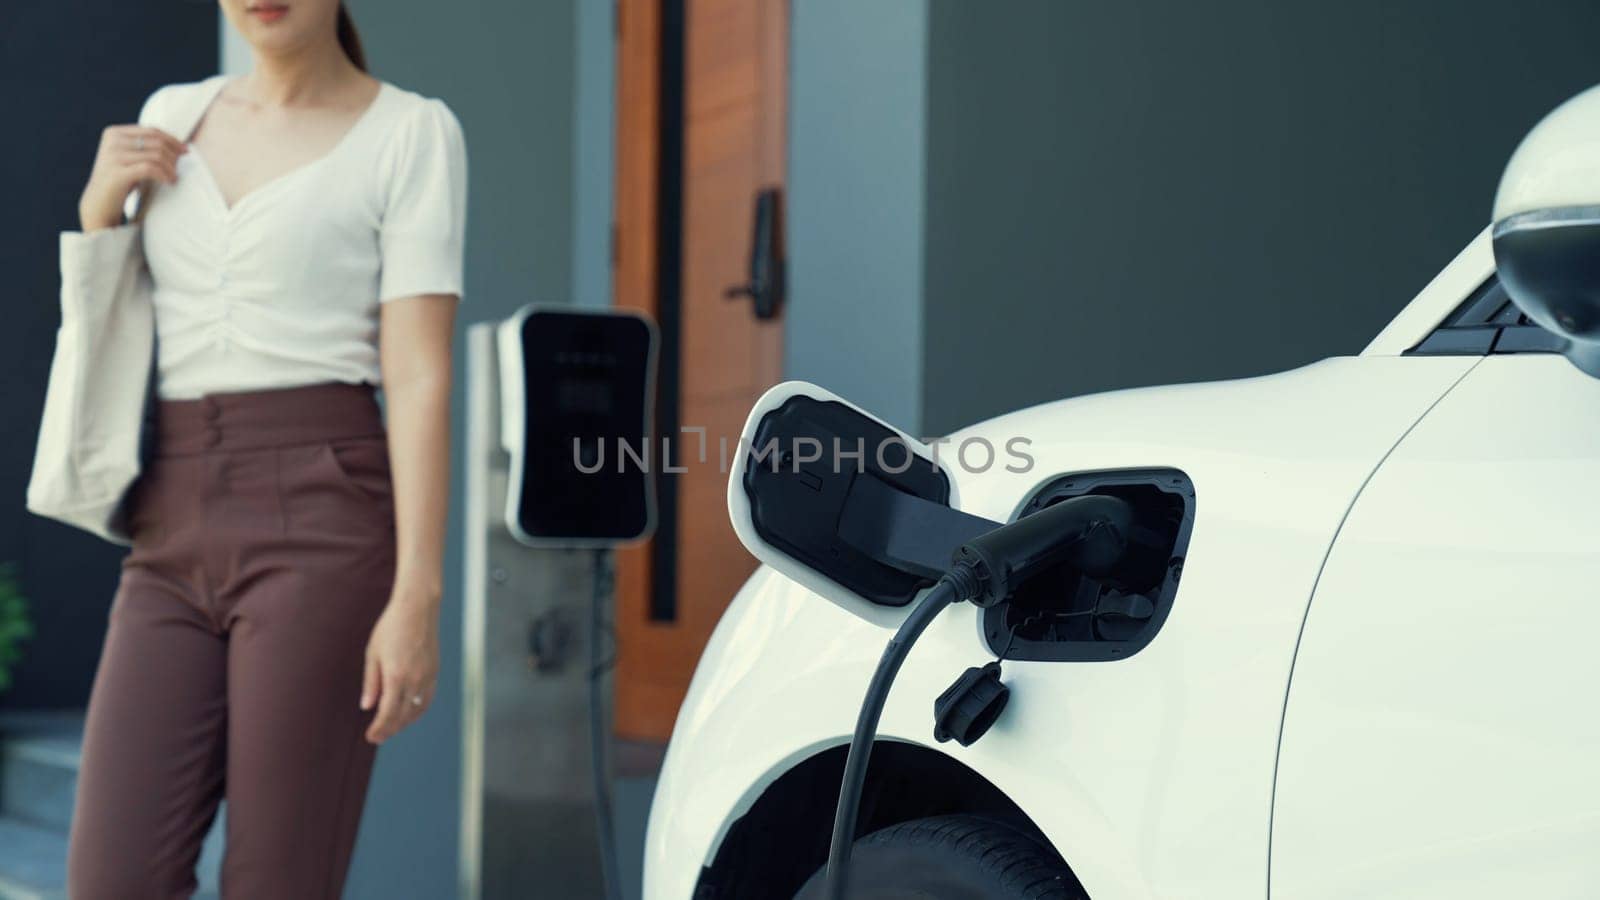 Progressive woman unplugs the electric vehicle's charger at his residence. by biancoblue